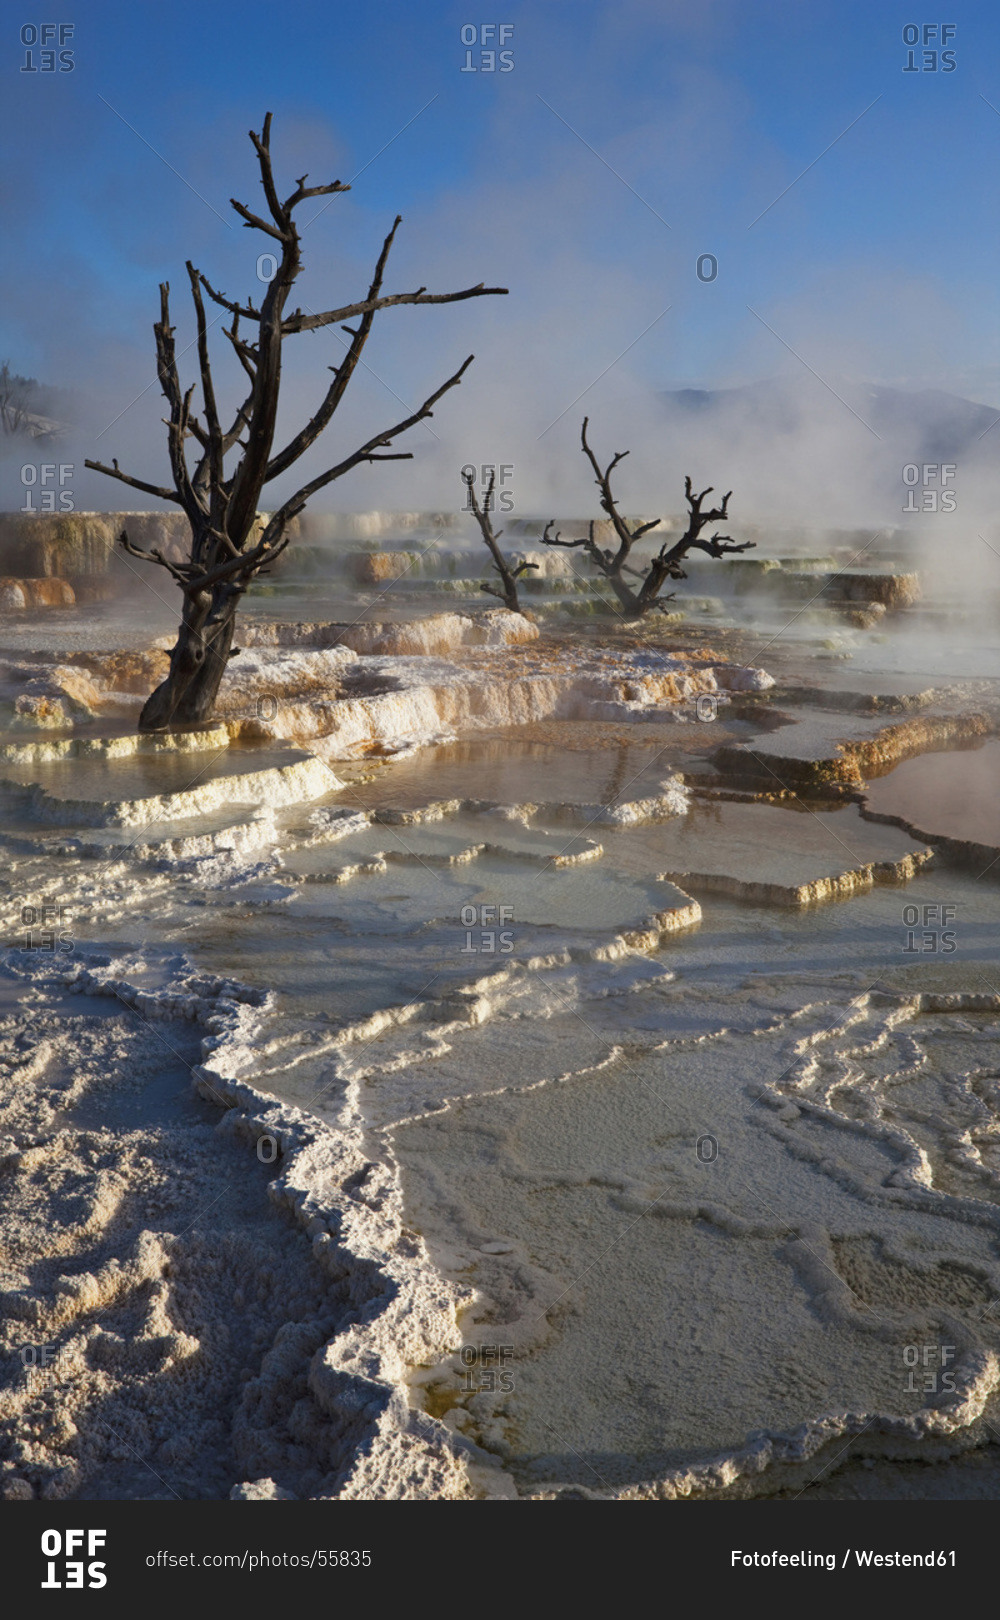 USA, Wyoming, Yellowstone National Park, Mammoth Hot Springs Terrace